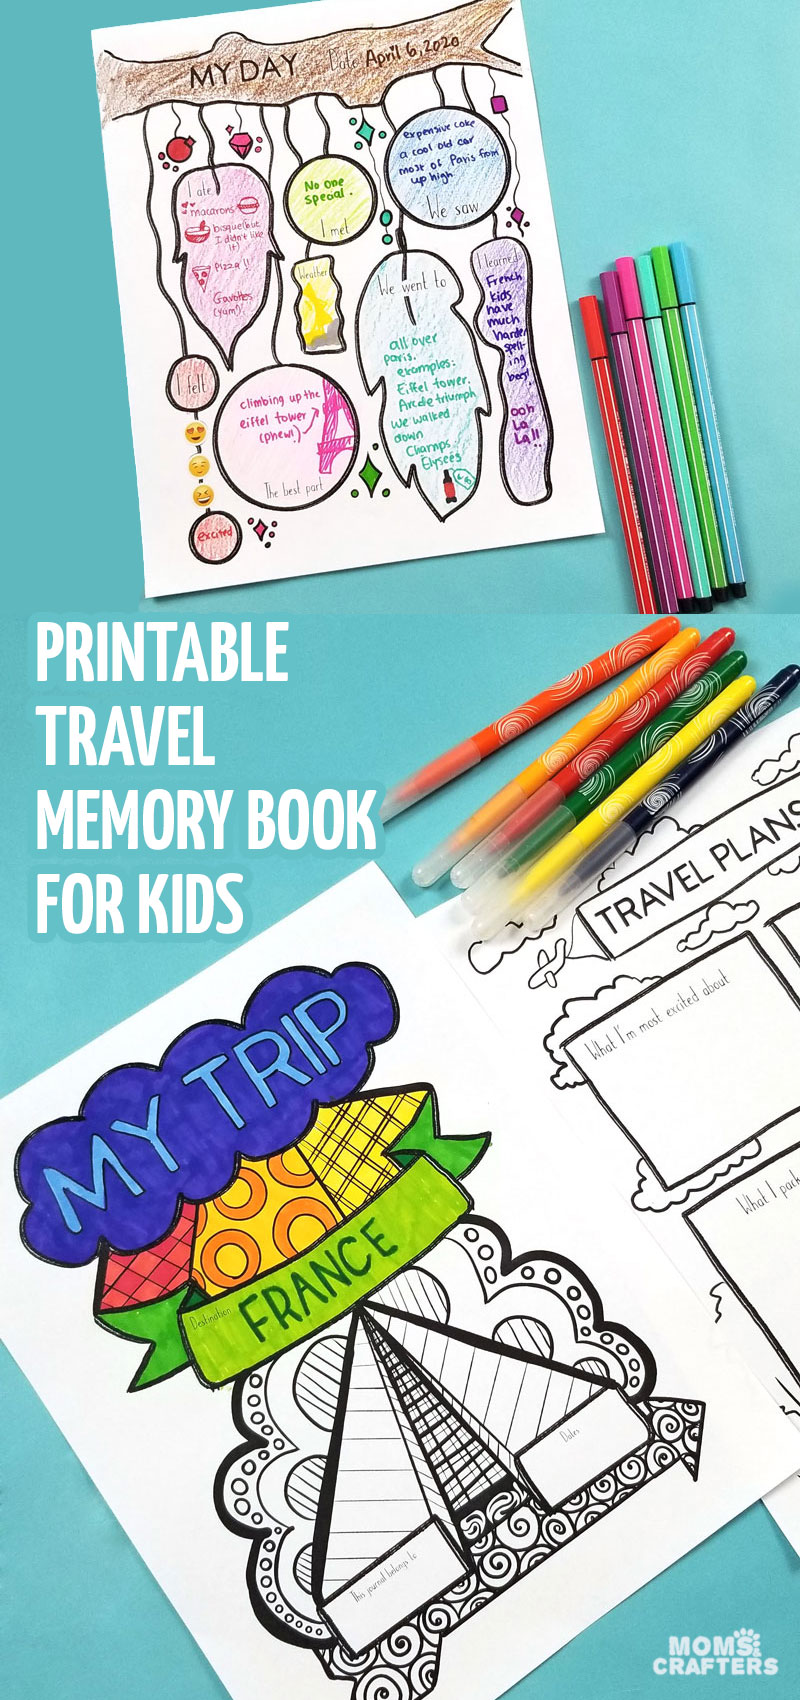 Oodles Most Awesome Travel Journal for Kids: Create A Travel Memory Book - Learn New Things - Do Fun Activities - Journaling, Drawing, Coloring